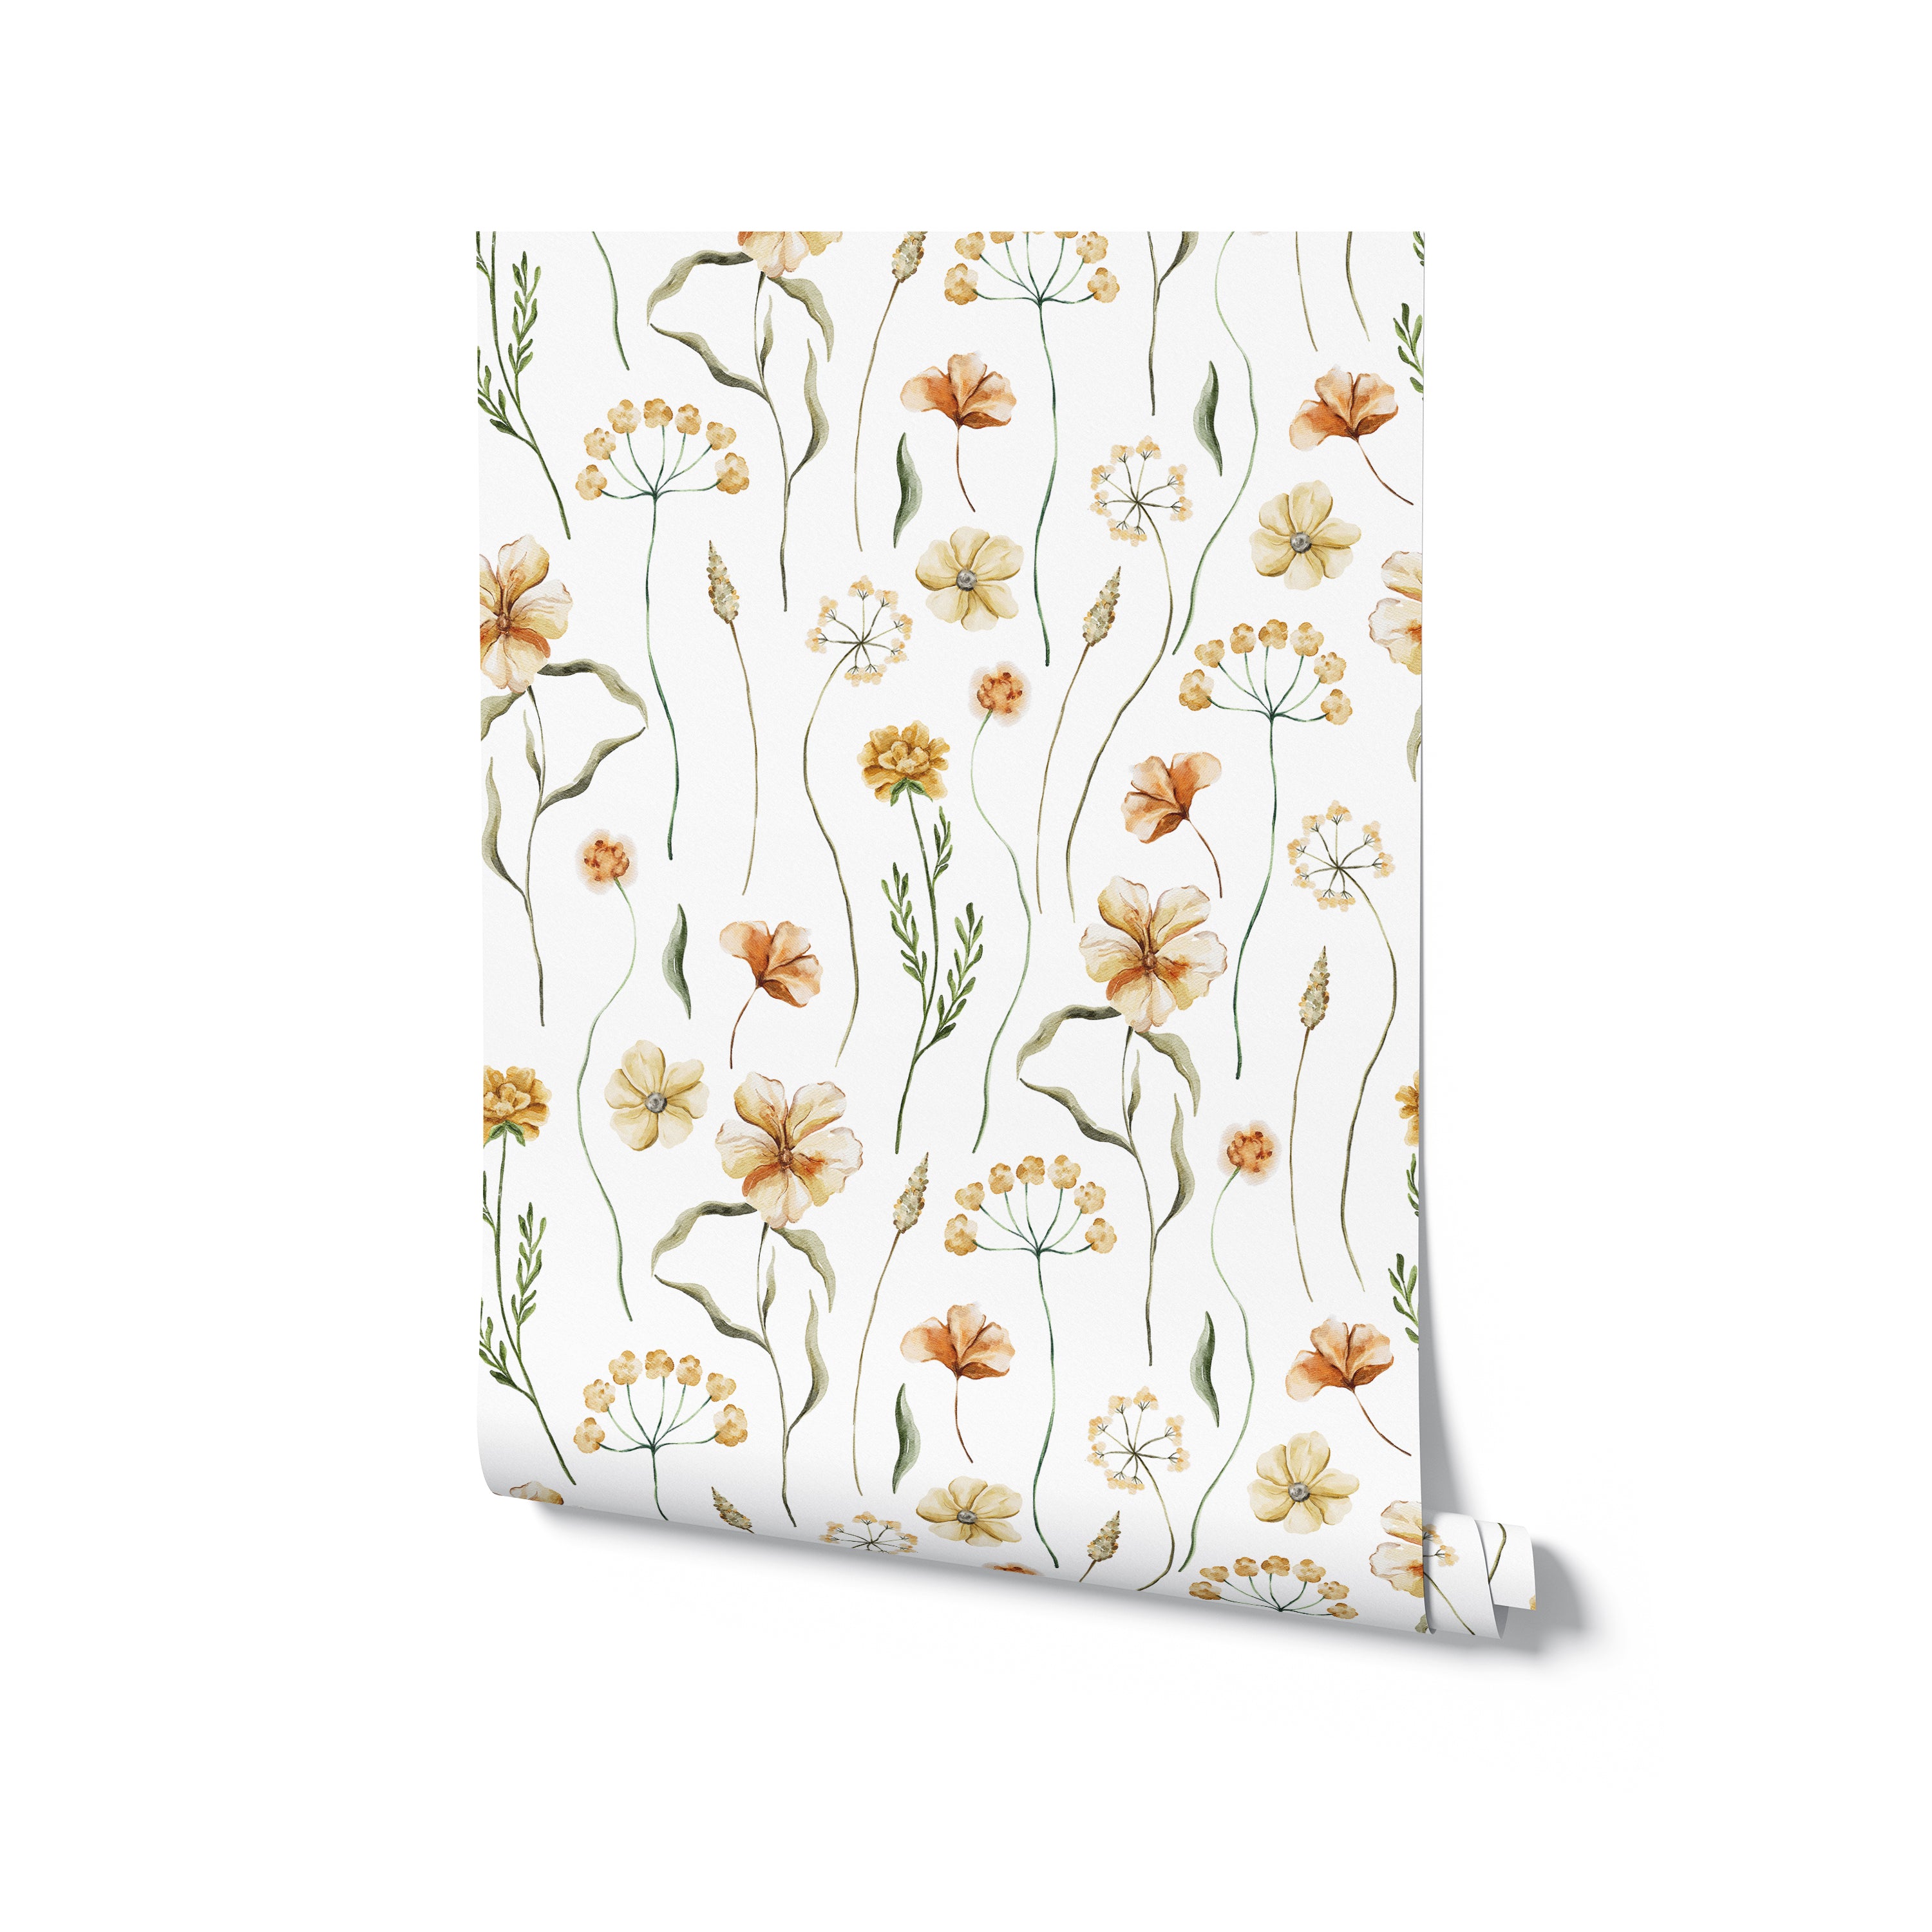 A roll of Warm Glow Floral Wallpaper showing off its intricate floral design in soft, warm hues. This image captures the texture and quality of the wallpaper, ideal for adding a cozy and natural touch to home interiors